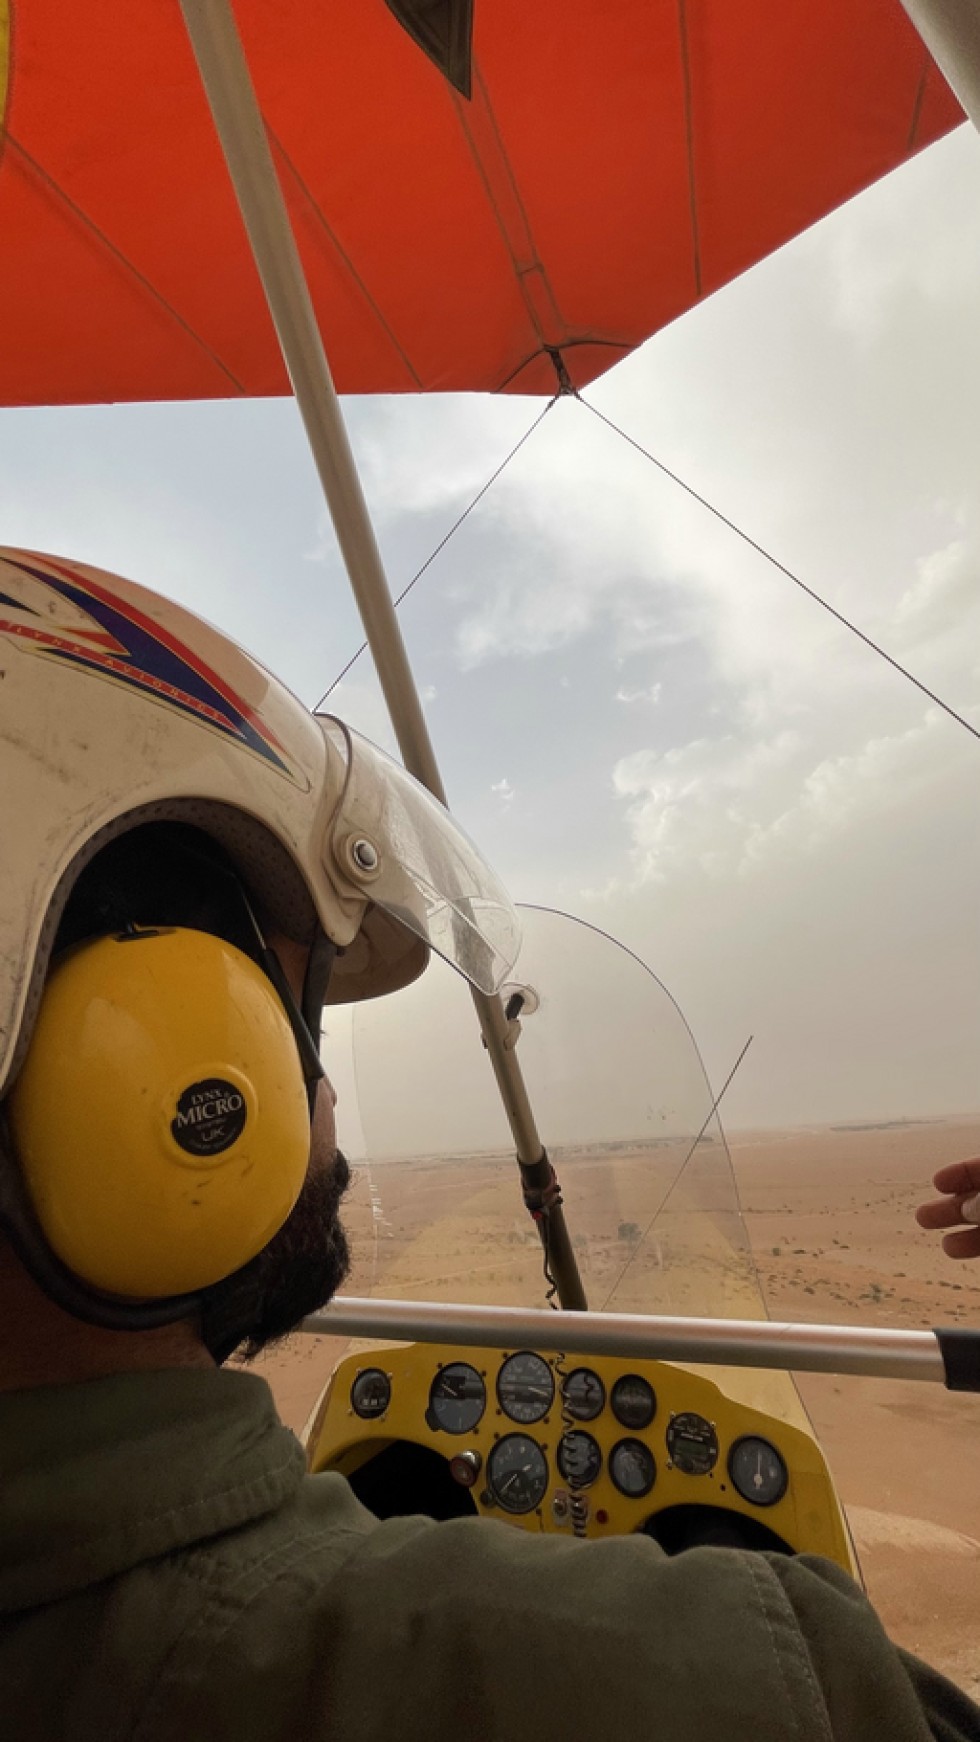  Soar above Arab skies with exhilarating hang gliding adventures. Experience breathtaking views and the thrill of flight like never before. 